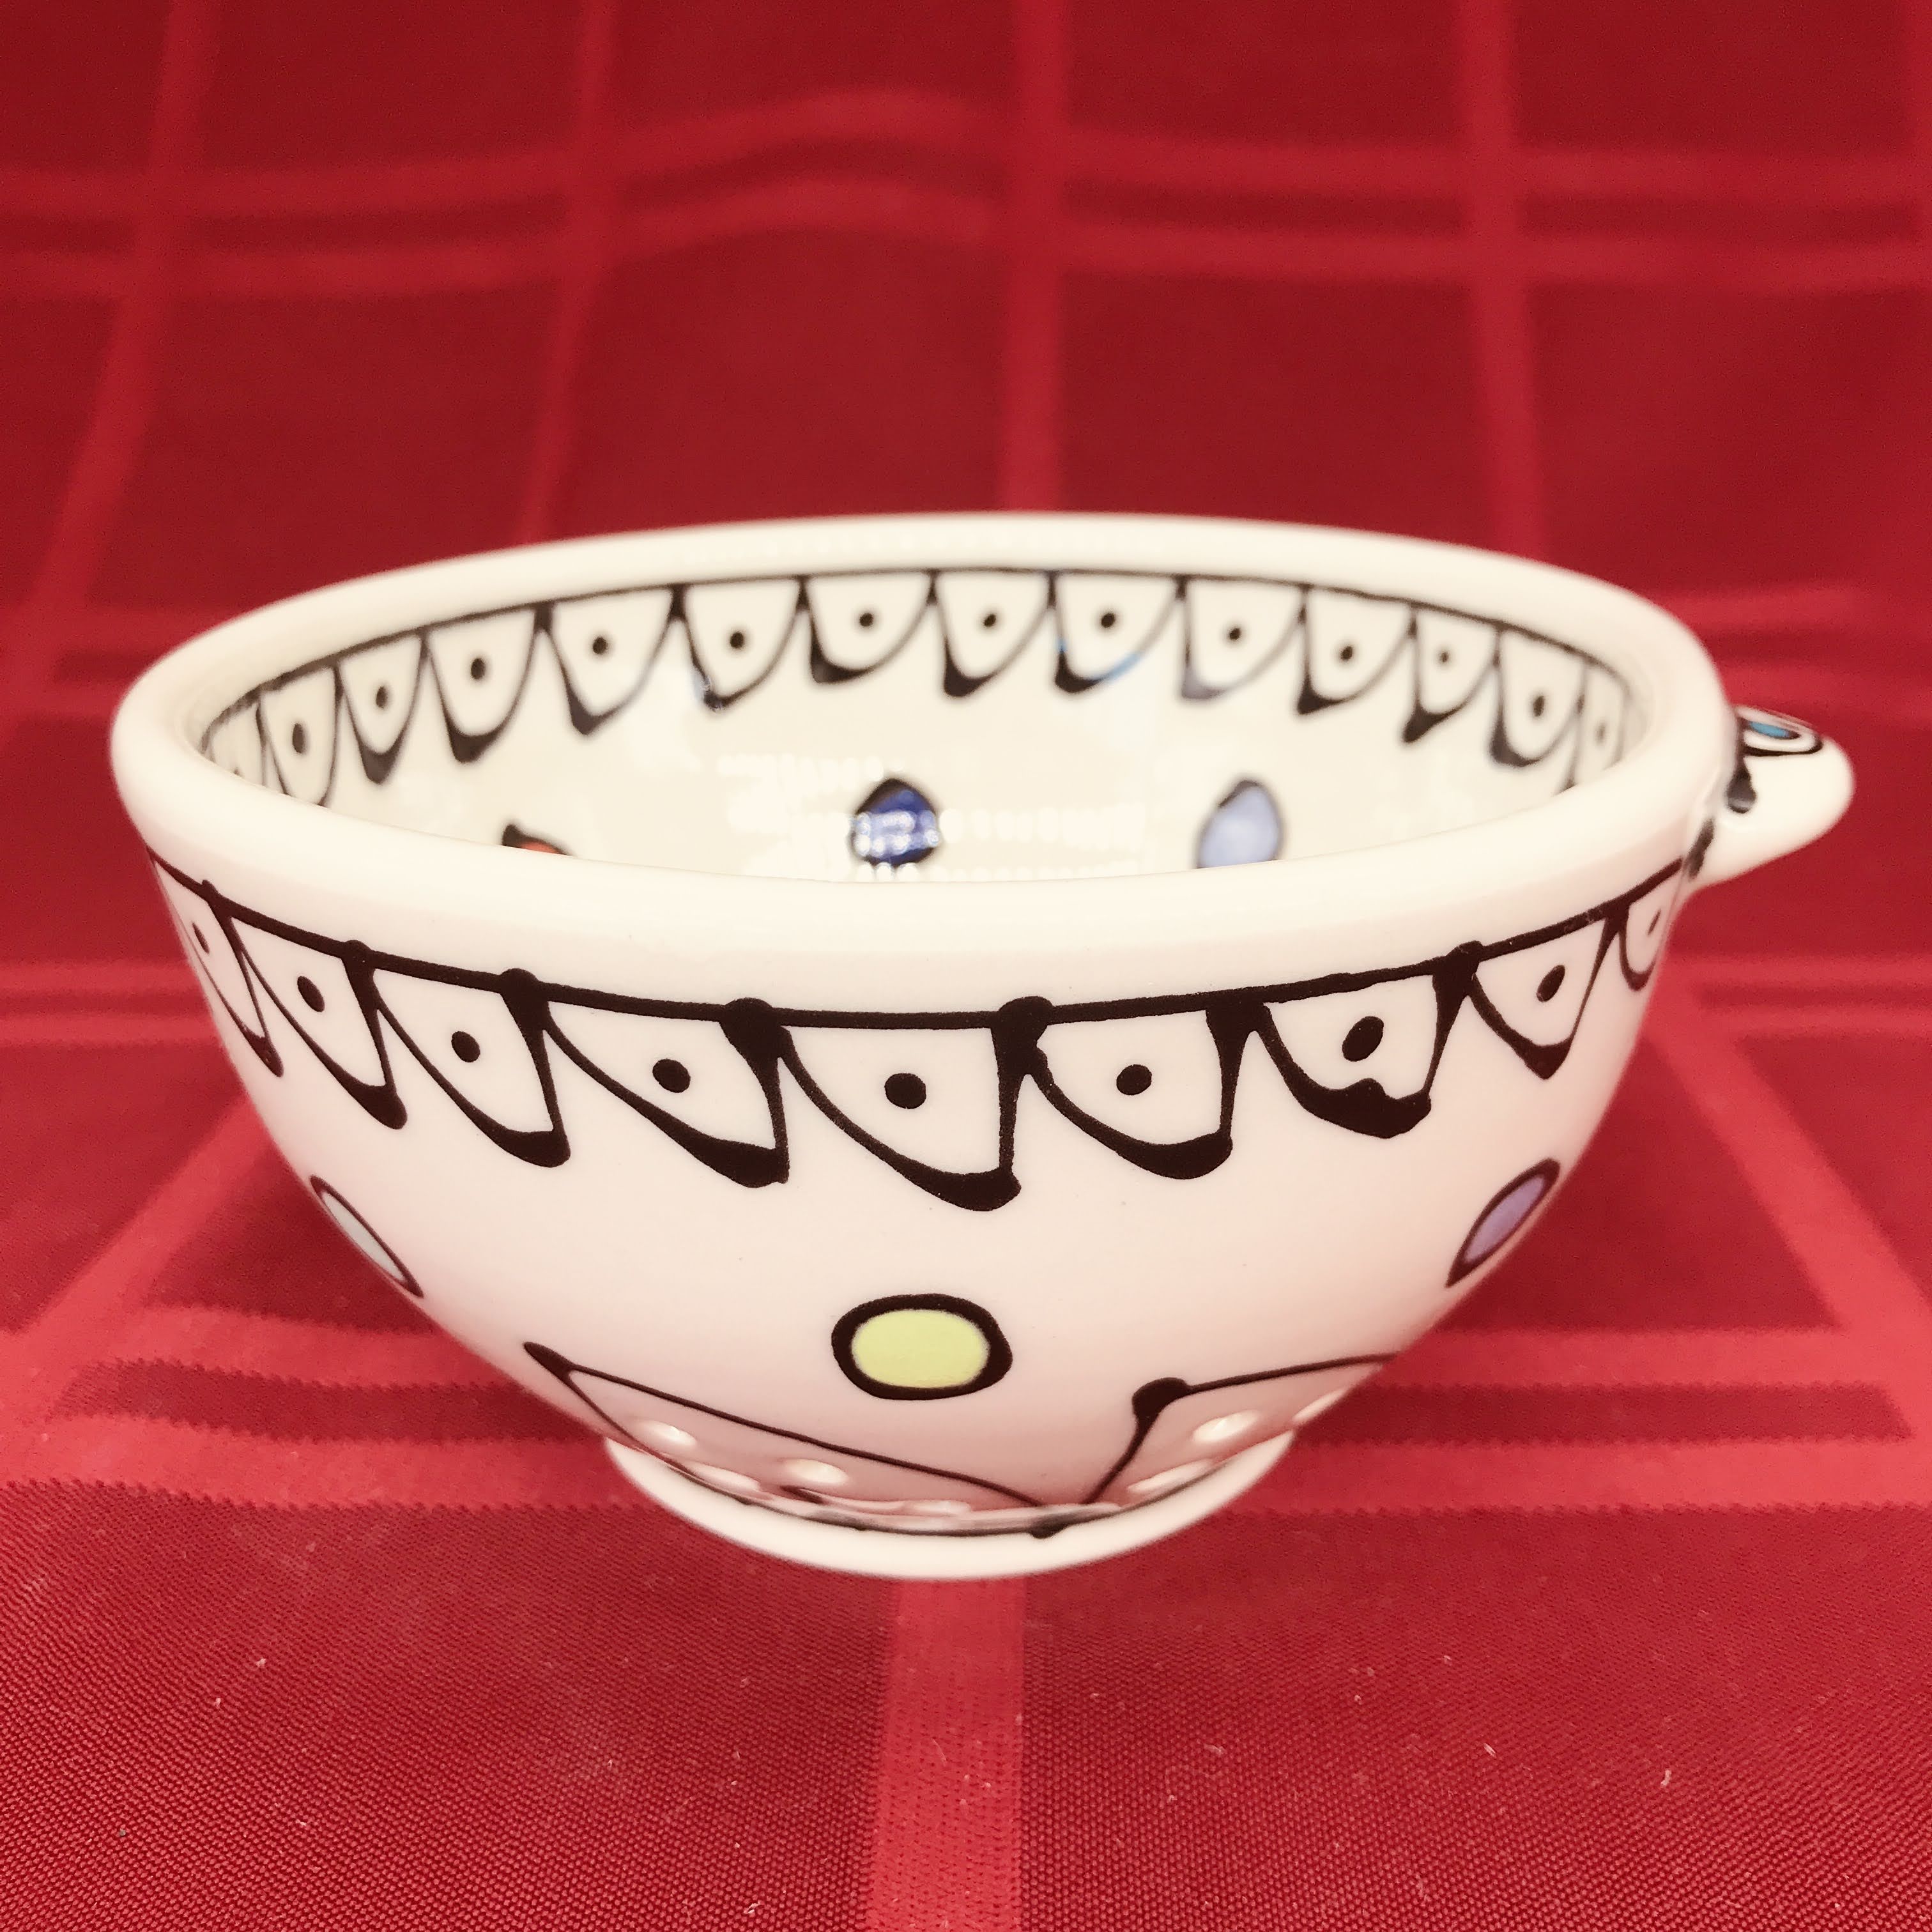 Berry Bowl  - Small (bbs02)